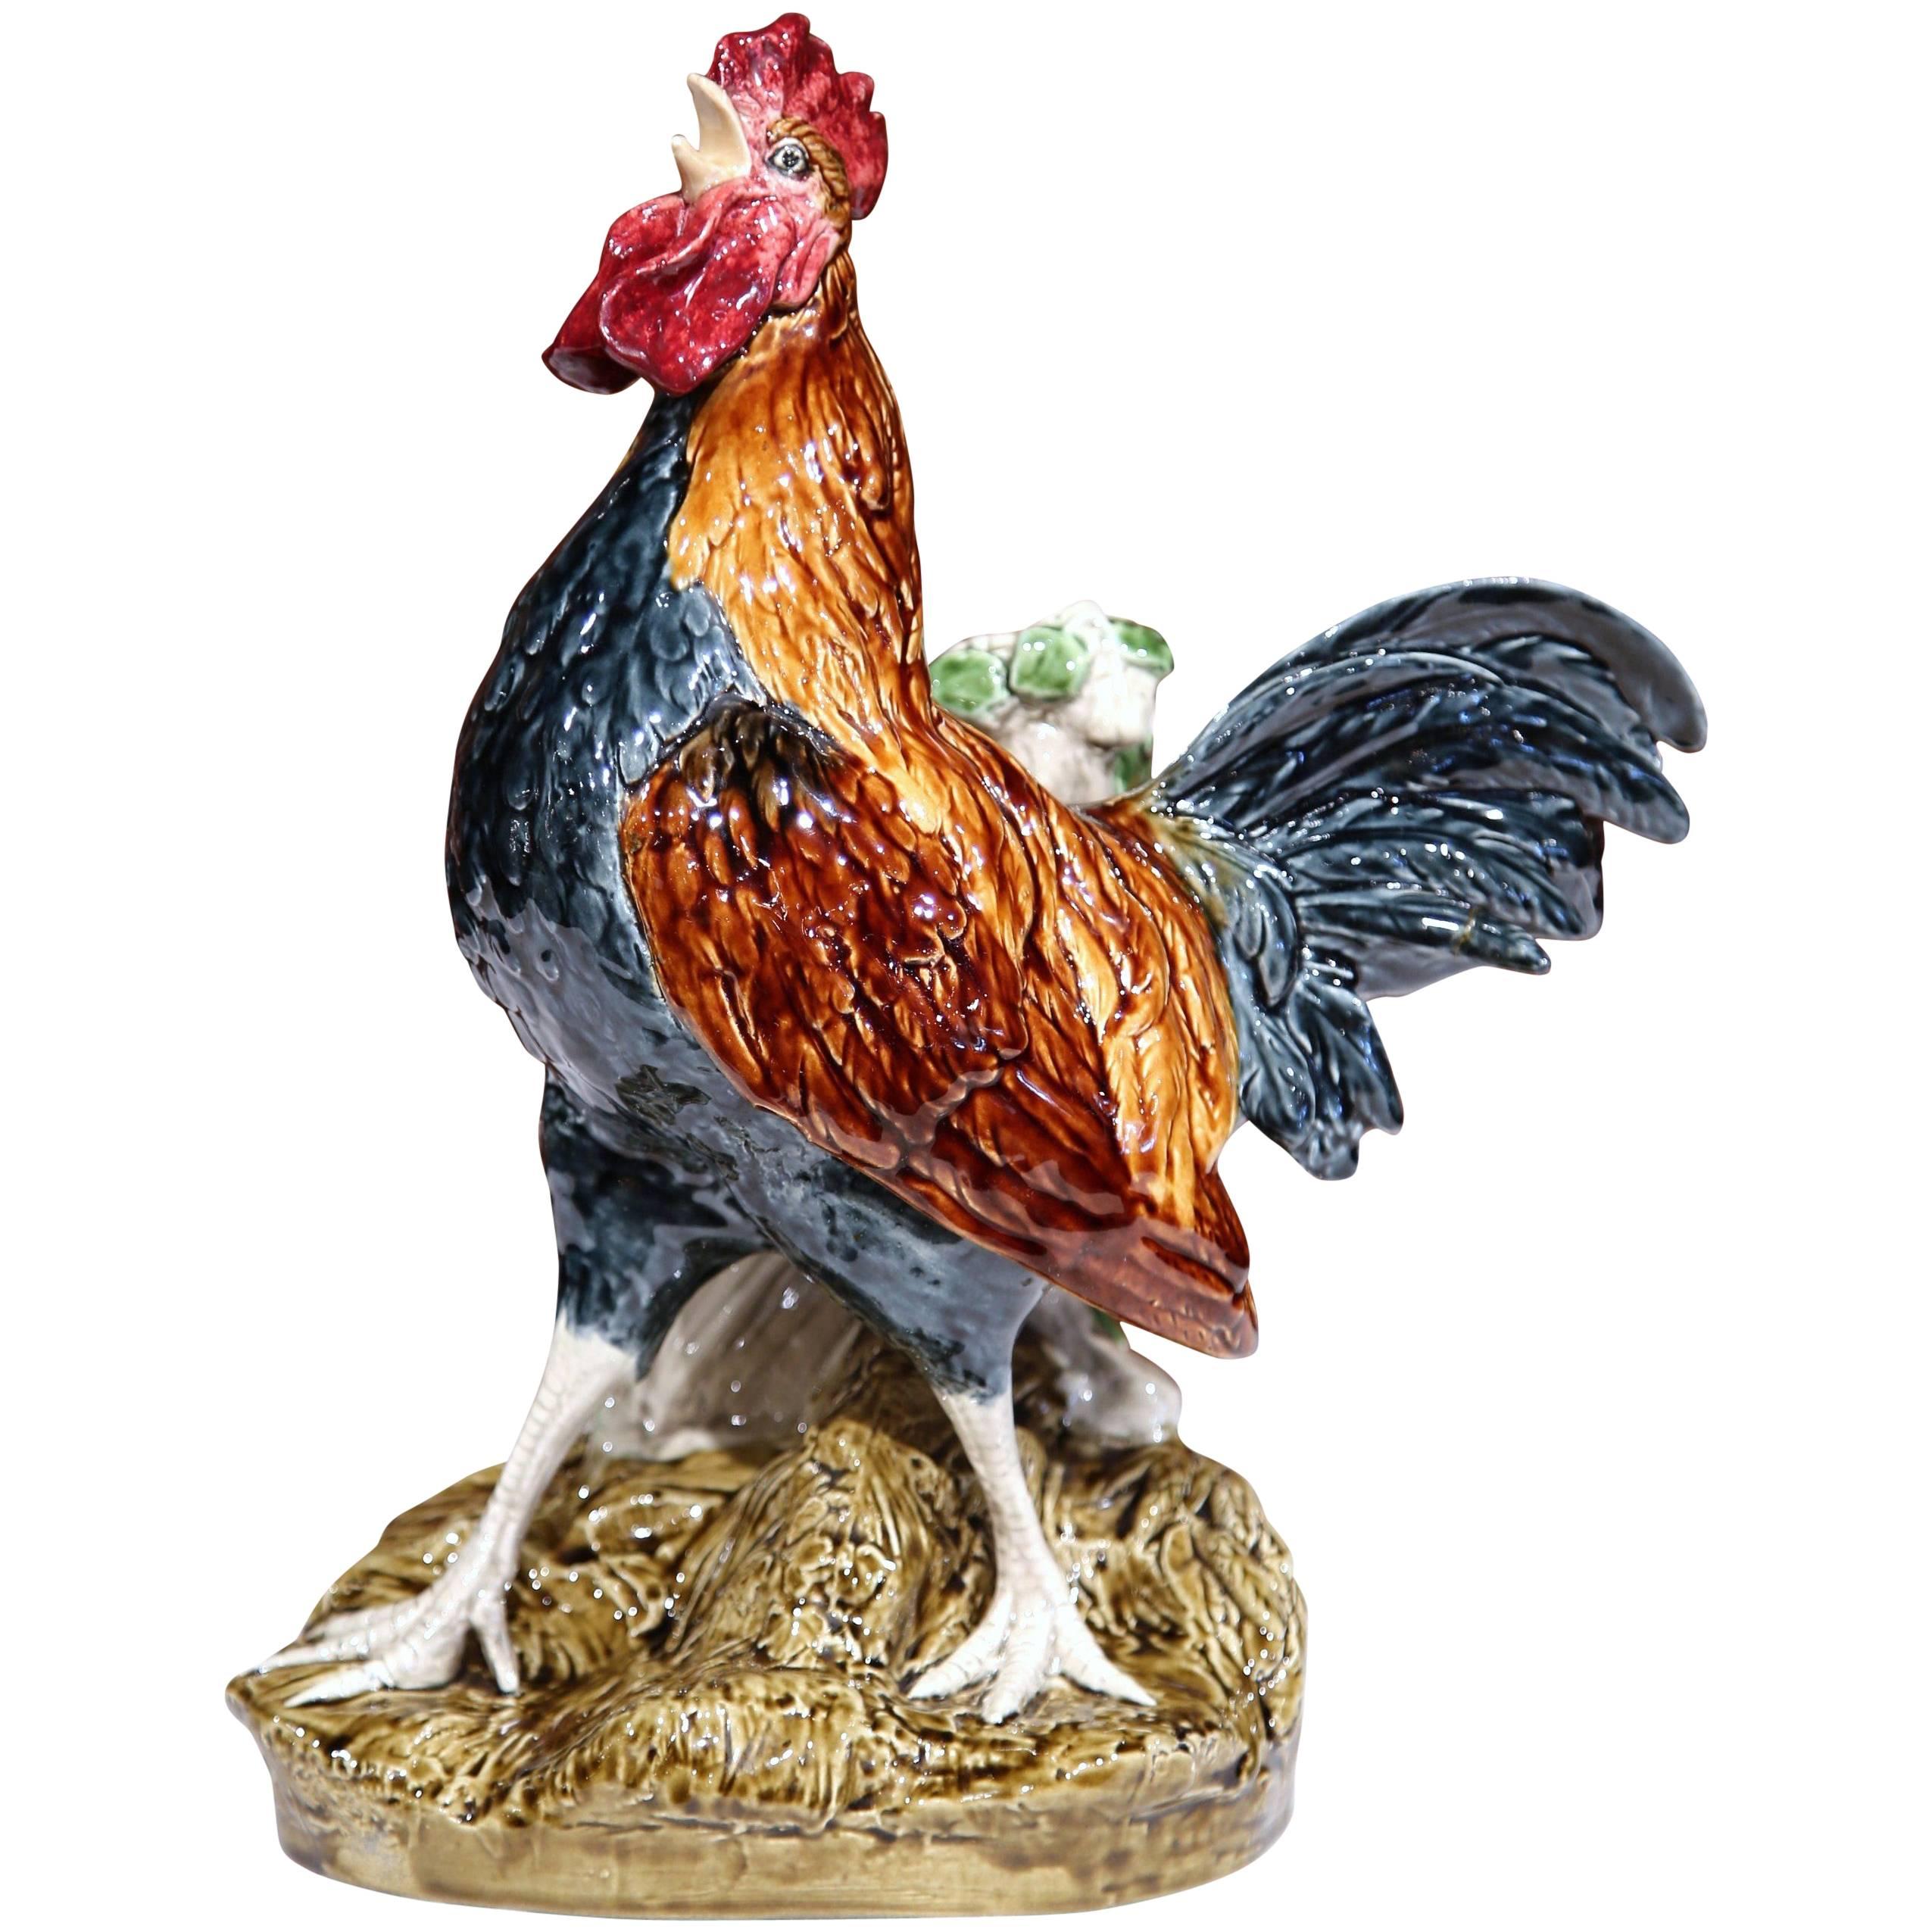 19th Century French Painted Barbotine Rooster Vase Signed Louis Carrier-Belleuse